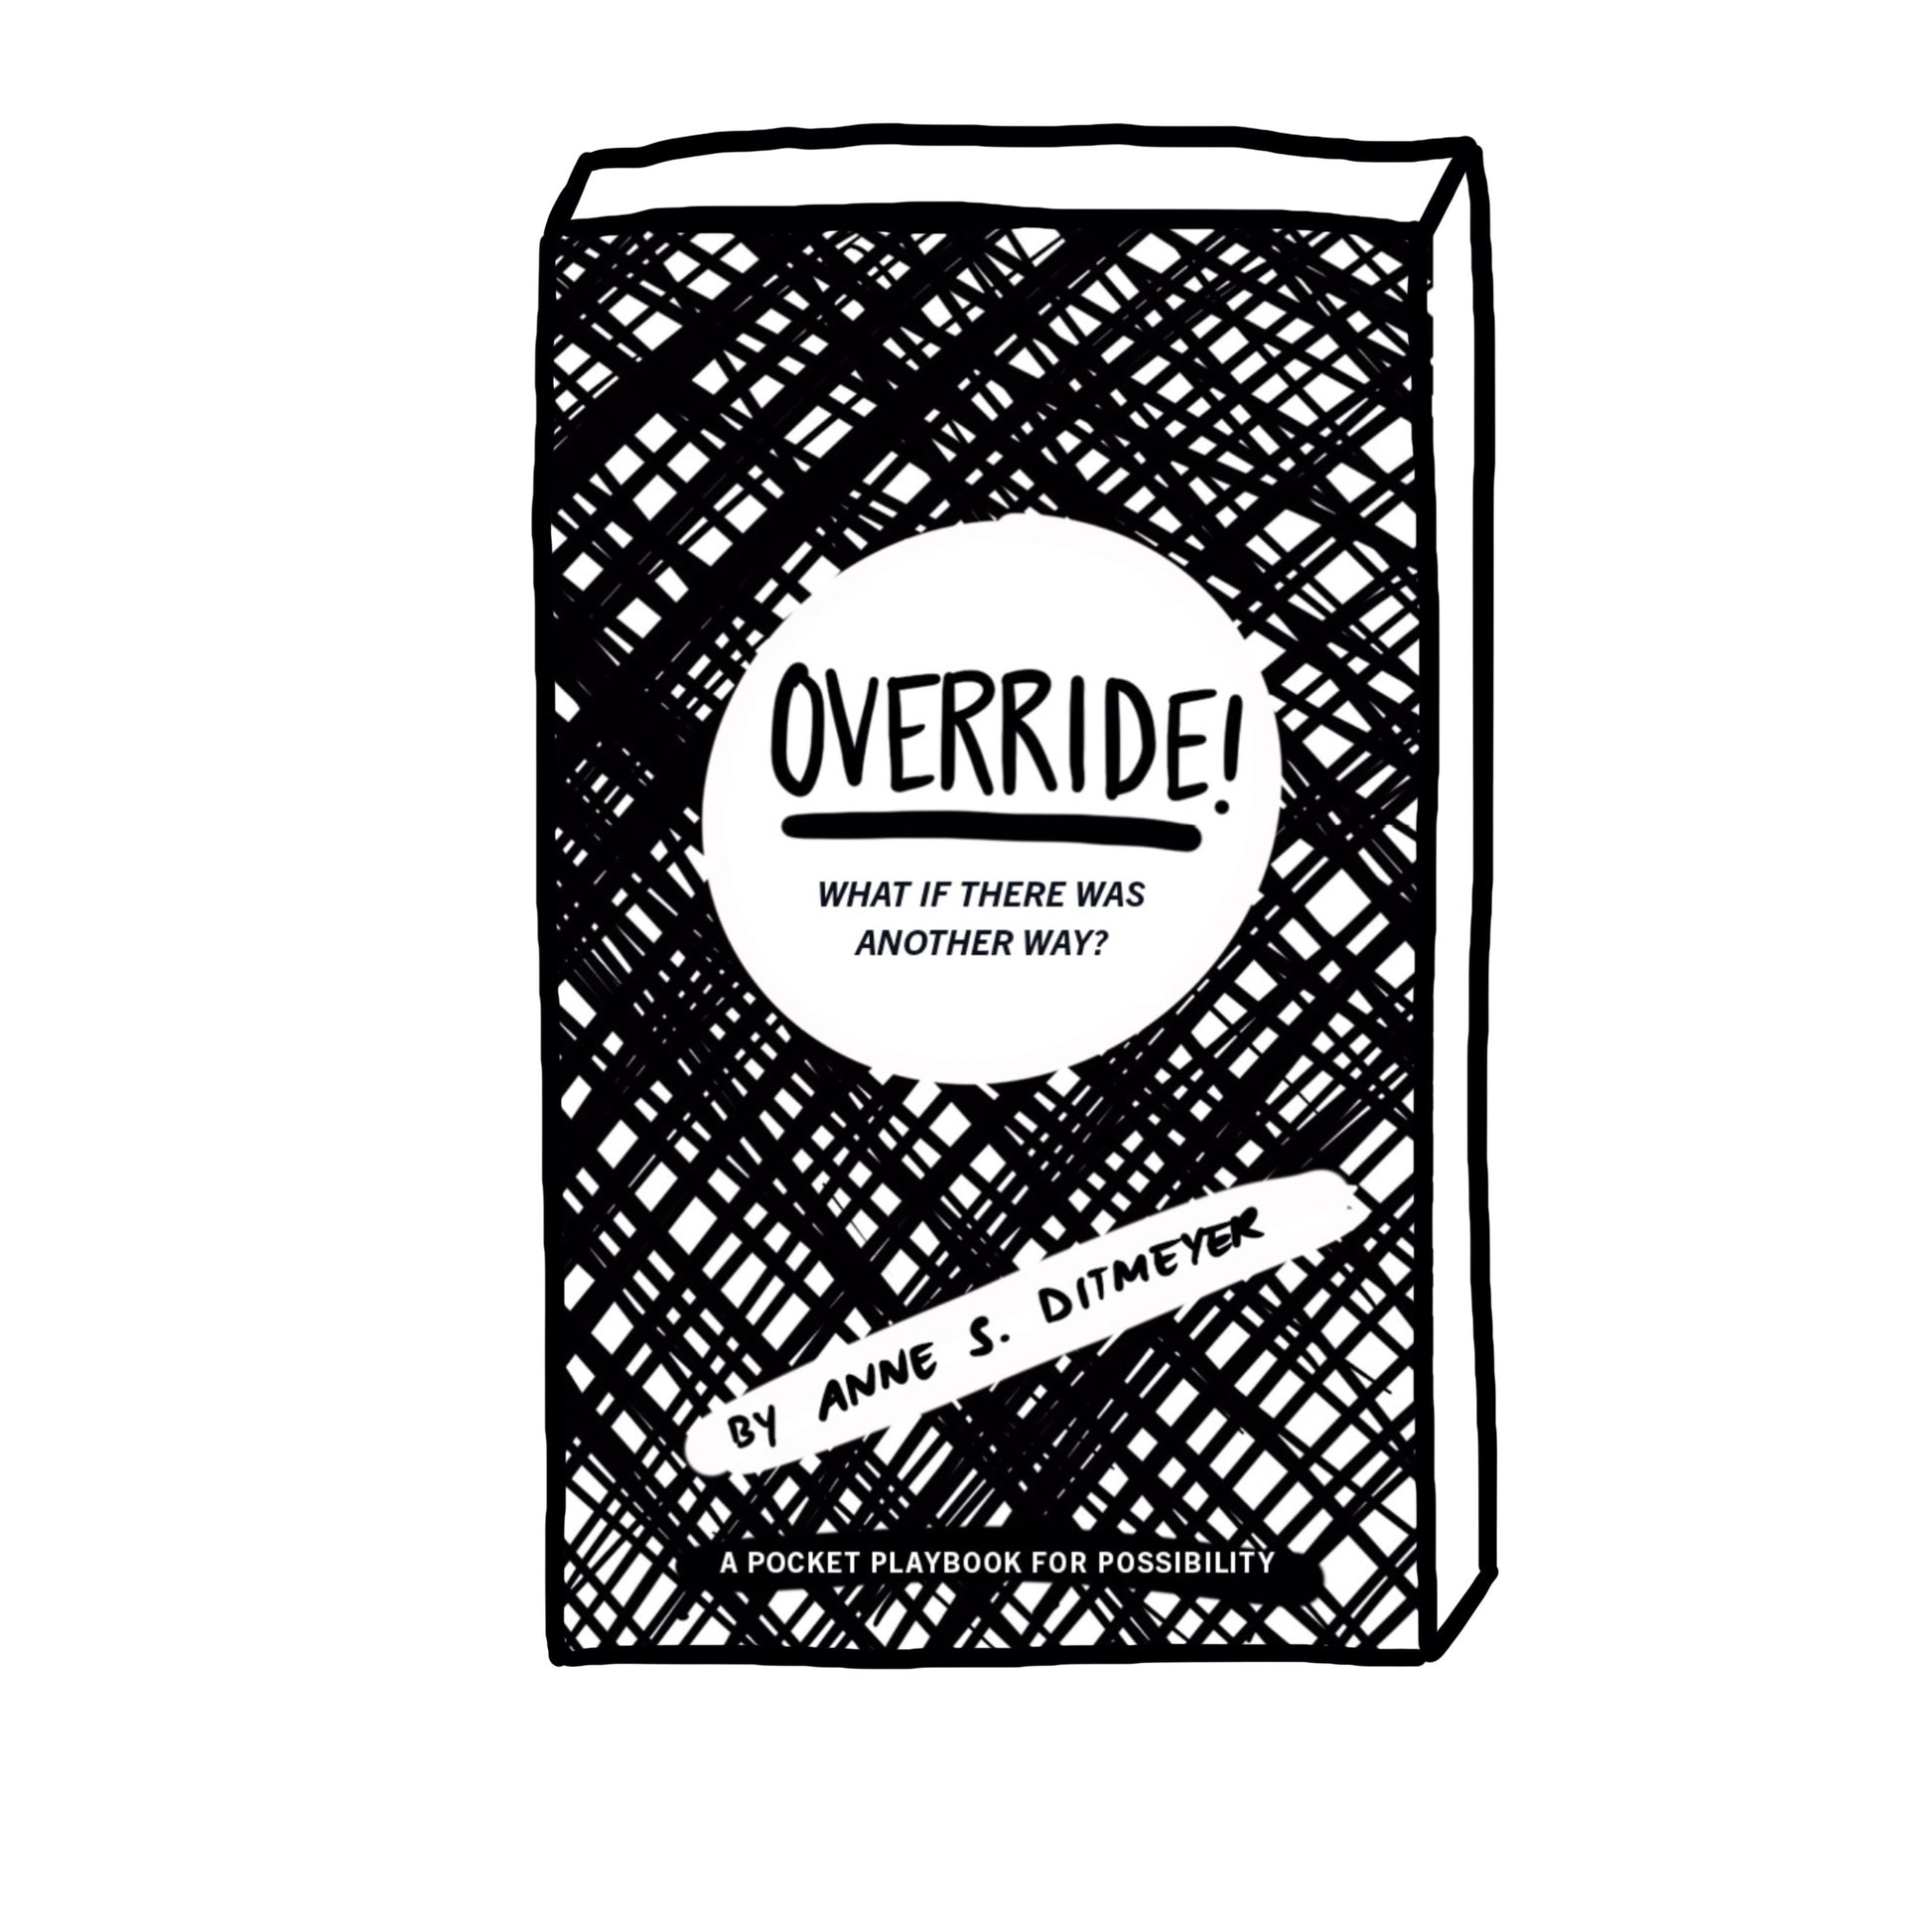 The cover of OVERRIDE! is black and white with hand drawn diagonal crosshatch. The title is in a white circle with handwritten bold text that says OVERRIDE! and an italic subtitle that says What if there was another way? At the bottom in a black line of text it reads a pocket playbook for possibility. The other in a diagonal white band says Anne S. Ditmeyer